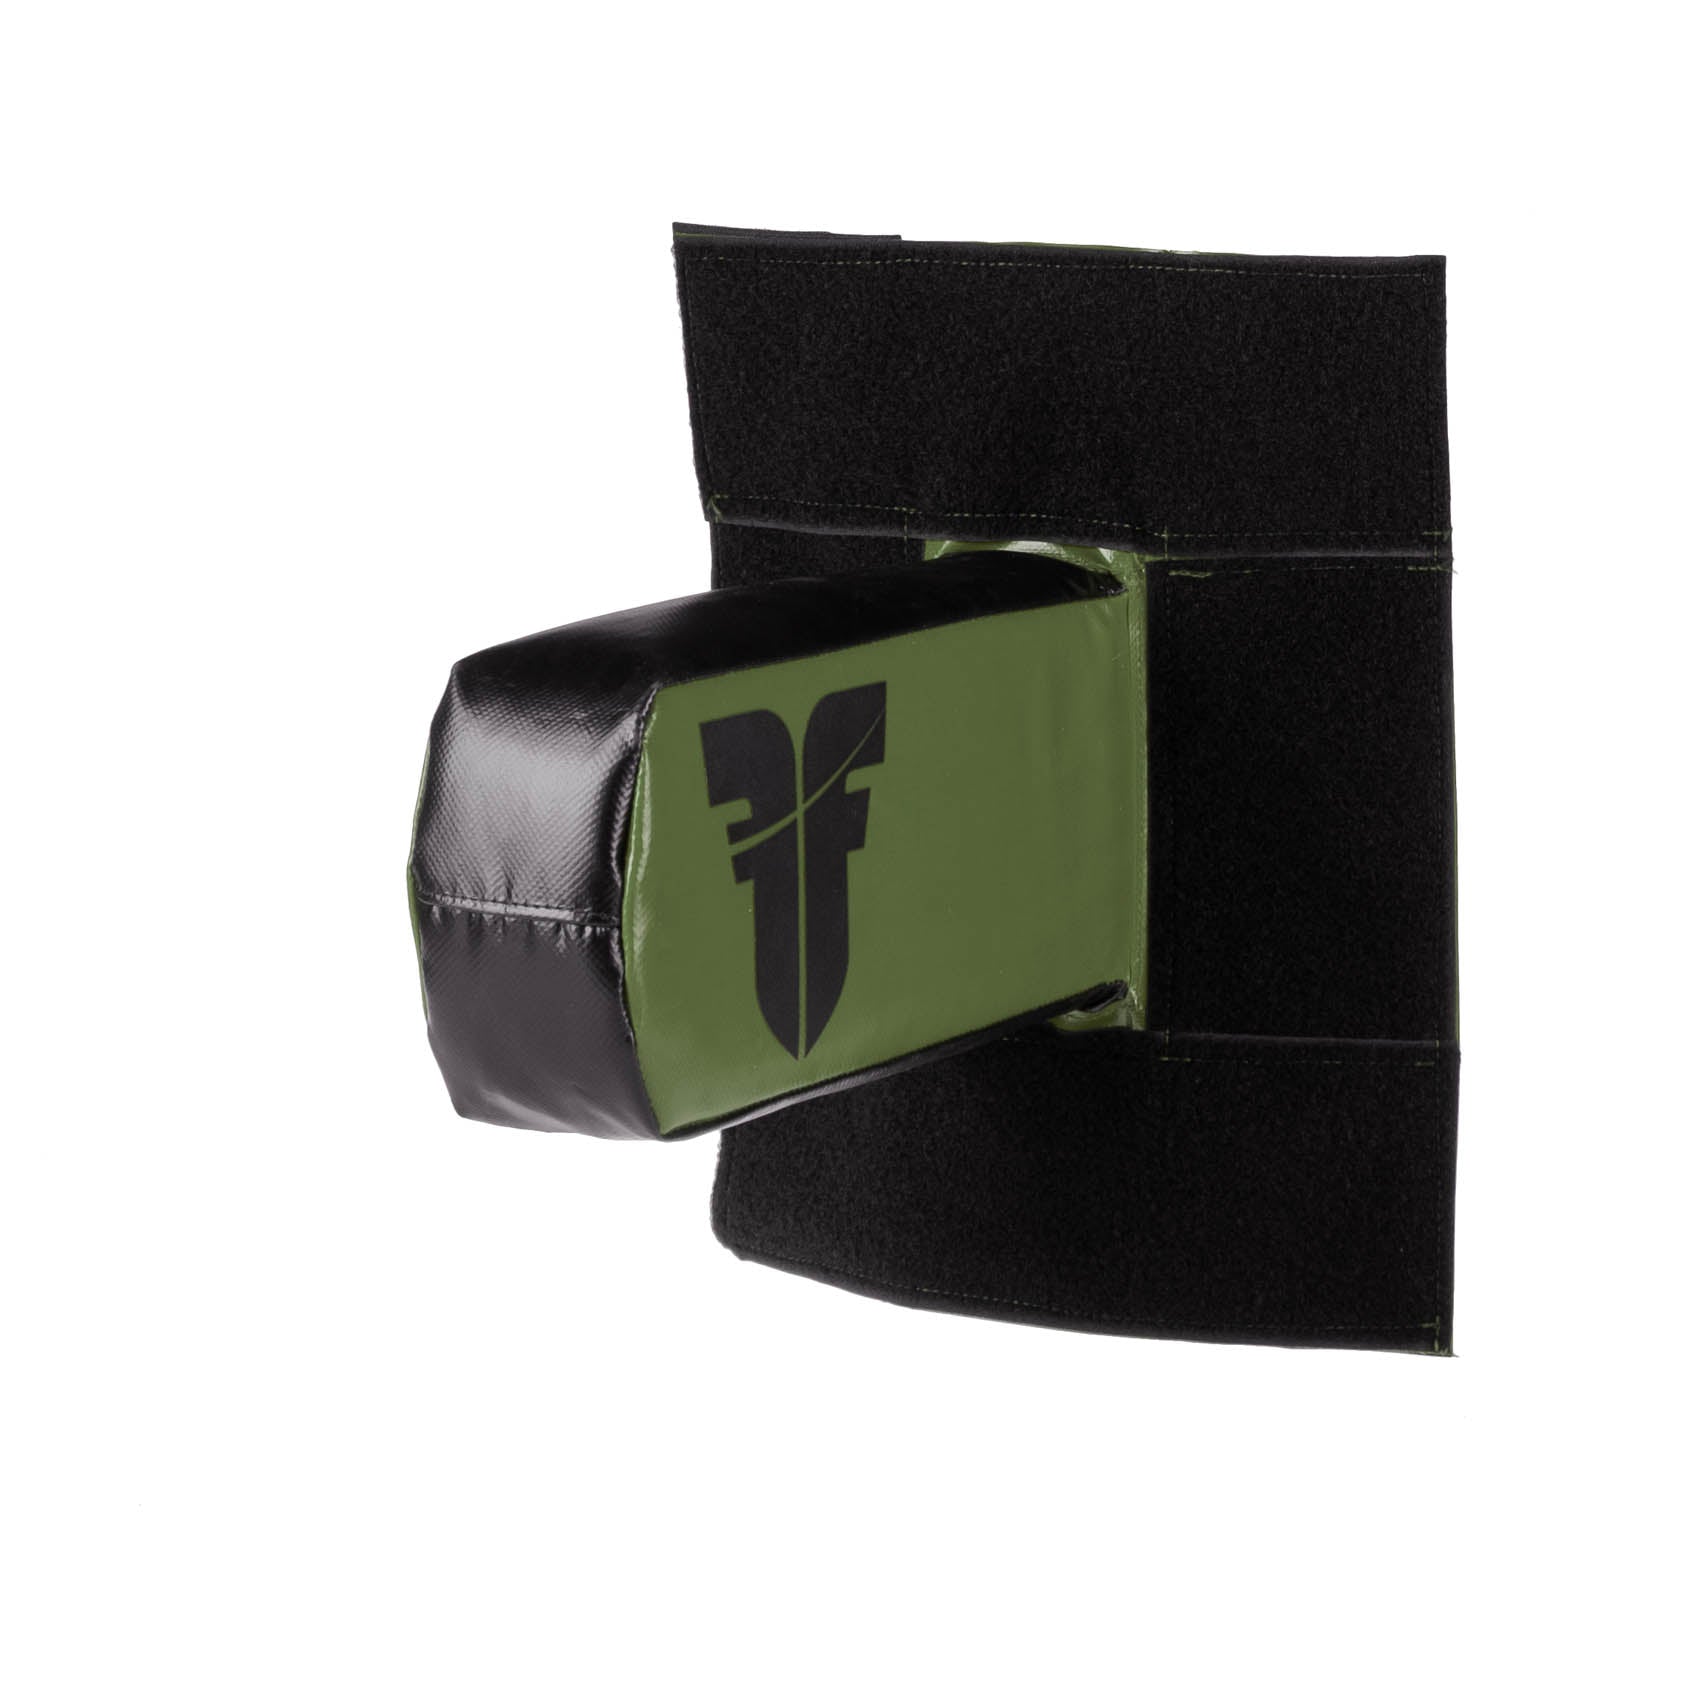 Fighter Arm Target M for Power Wall - army green/black, FPWS-08-KH